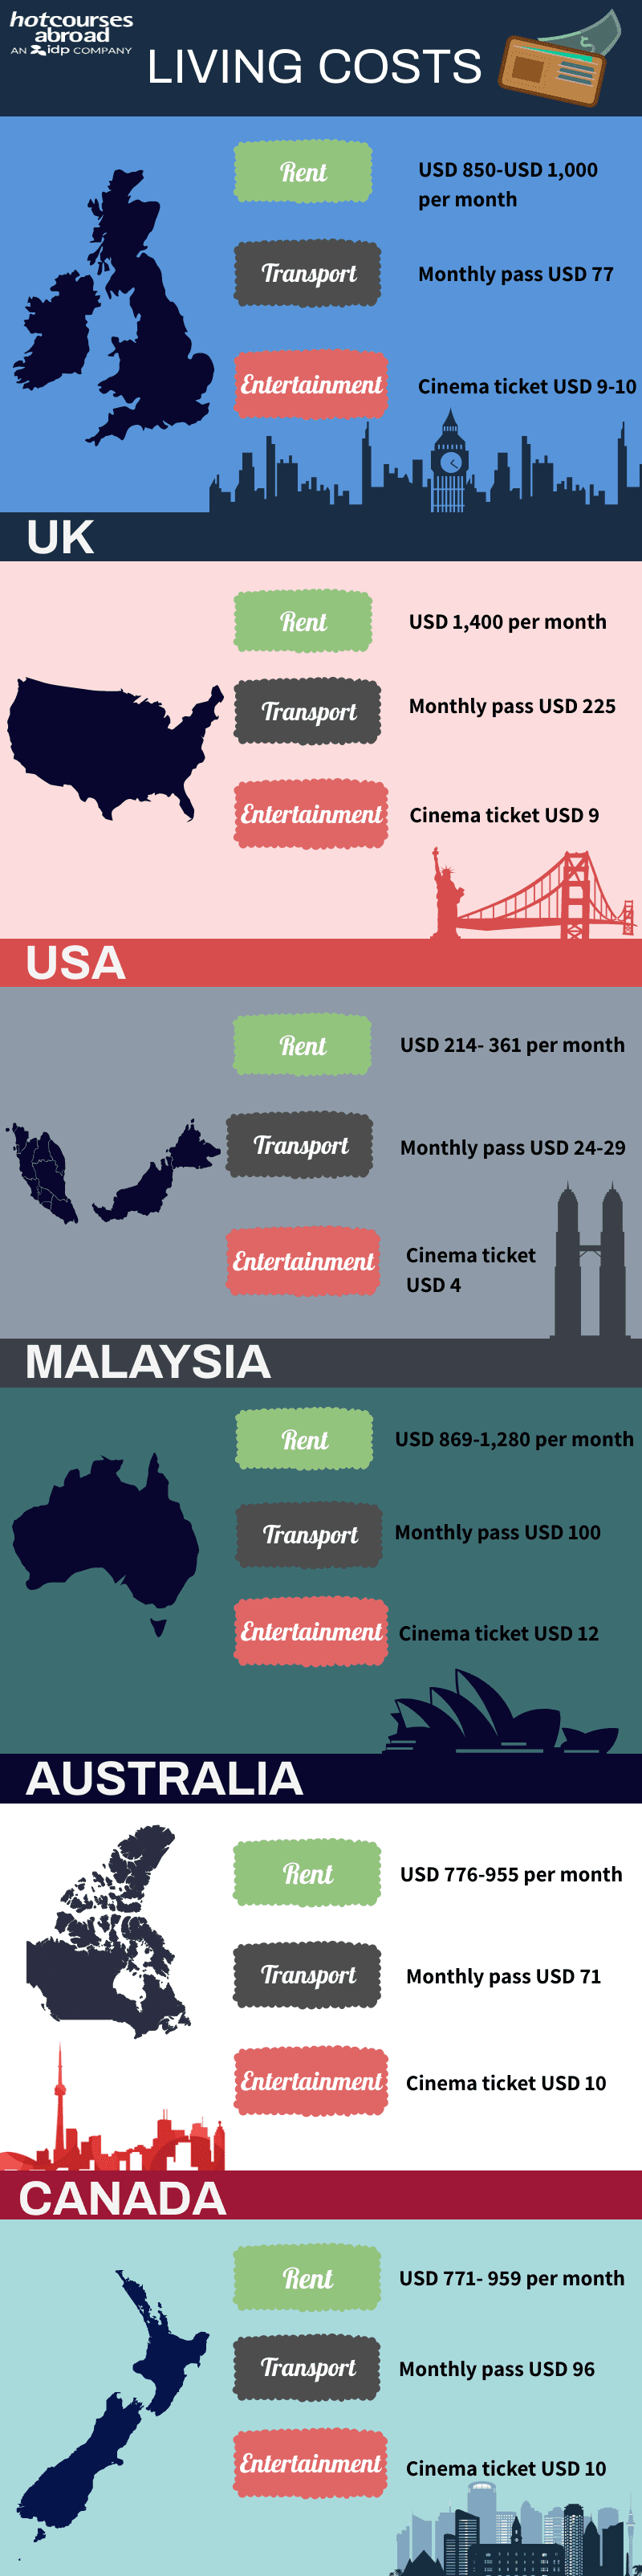 Is studying cheaper in USA or UK?